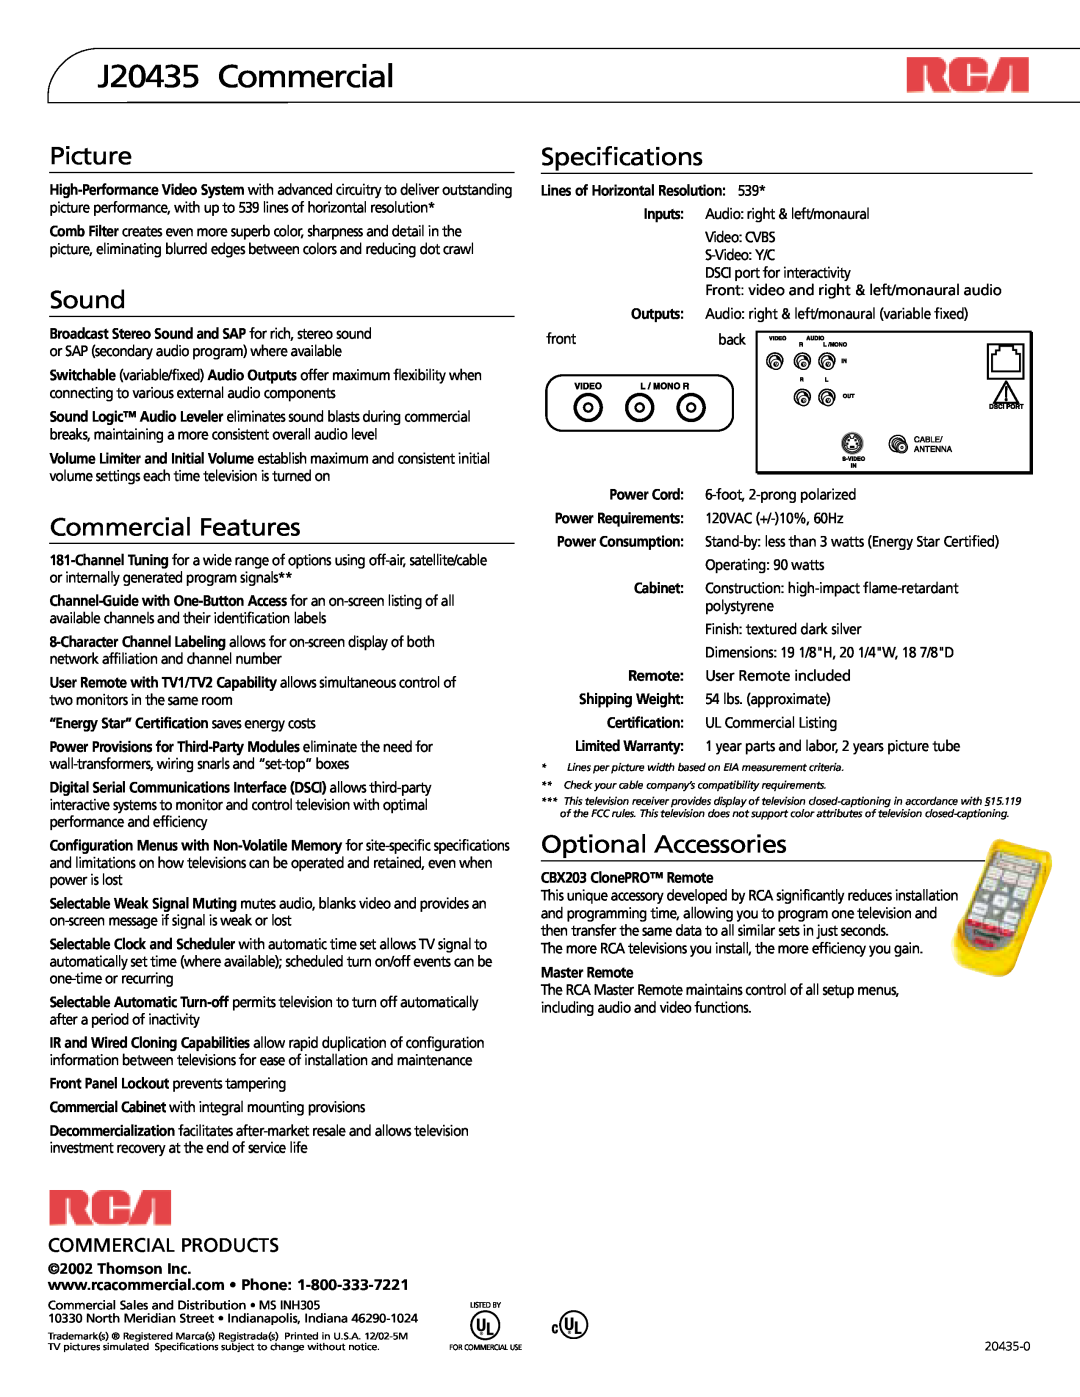 RCA J20435 Commercial, Picture, Sound, Commercial Features, Specifications, Optional Accessories, Commercial Products 